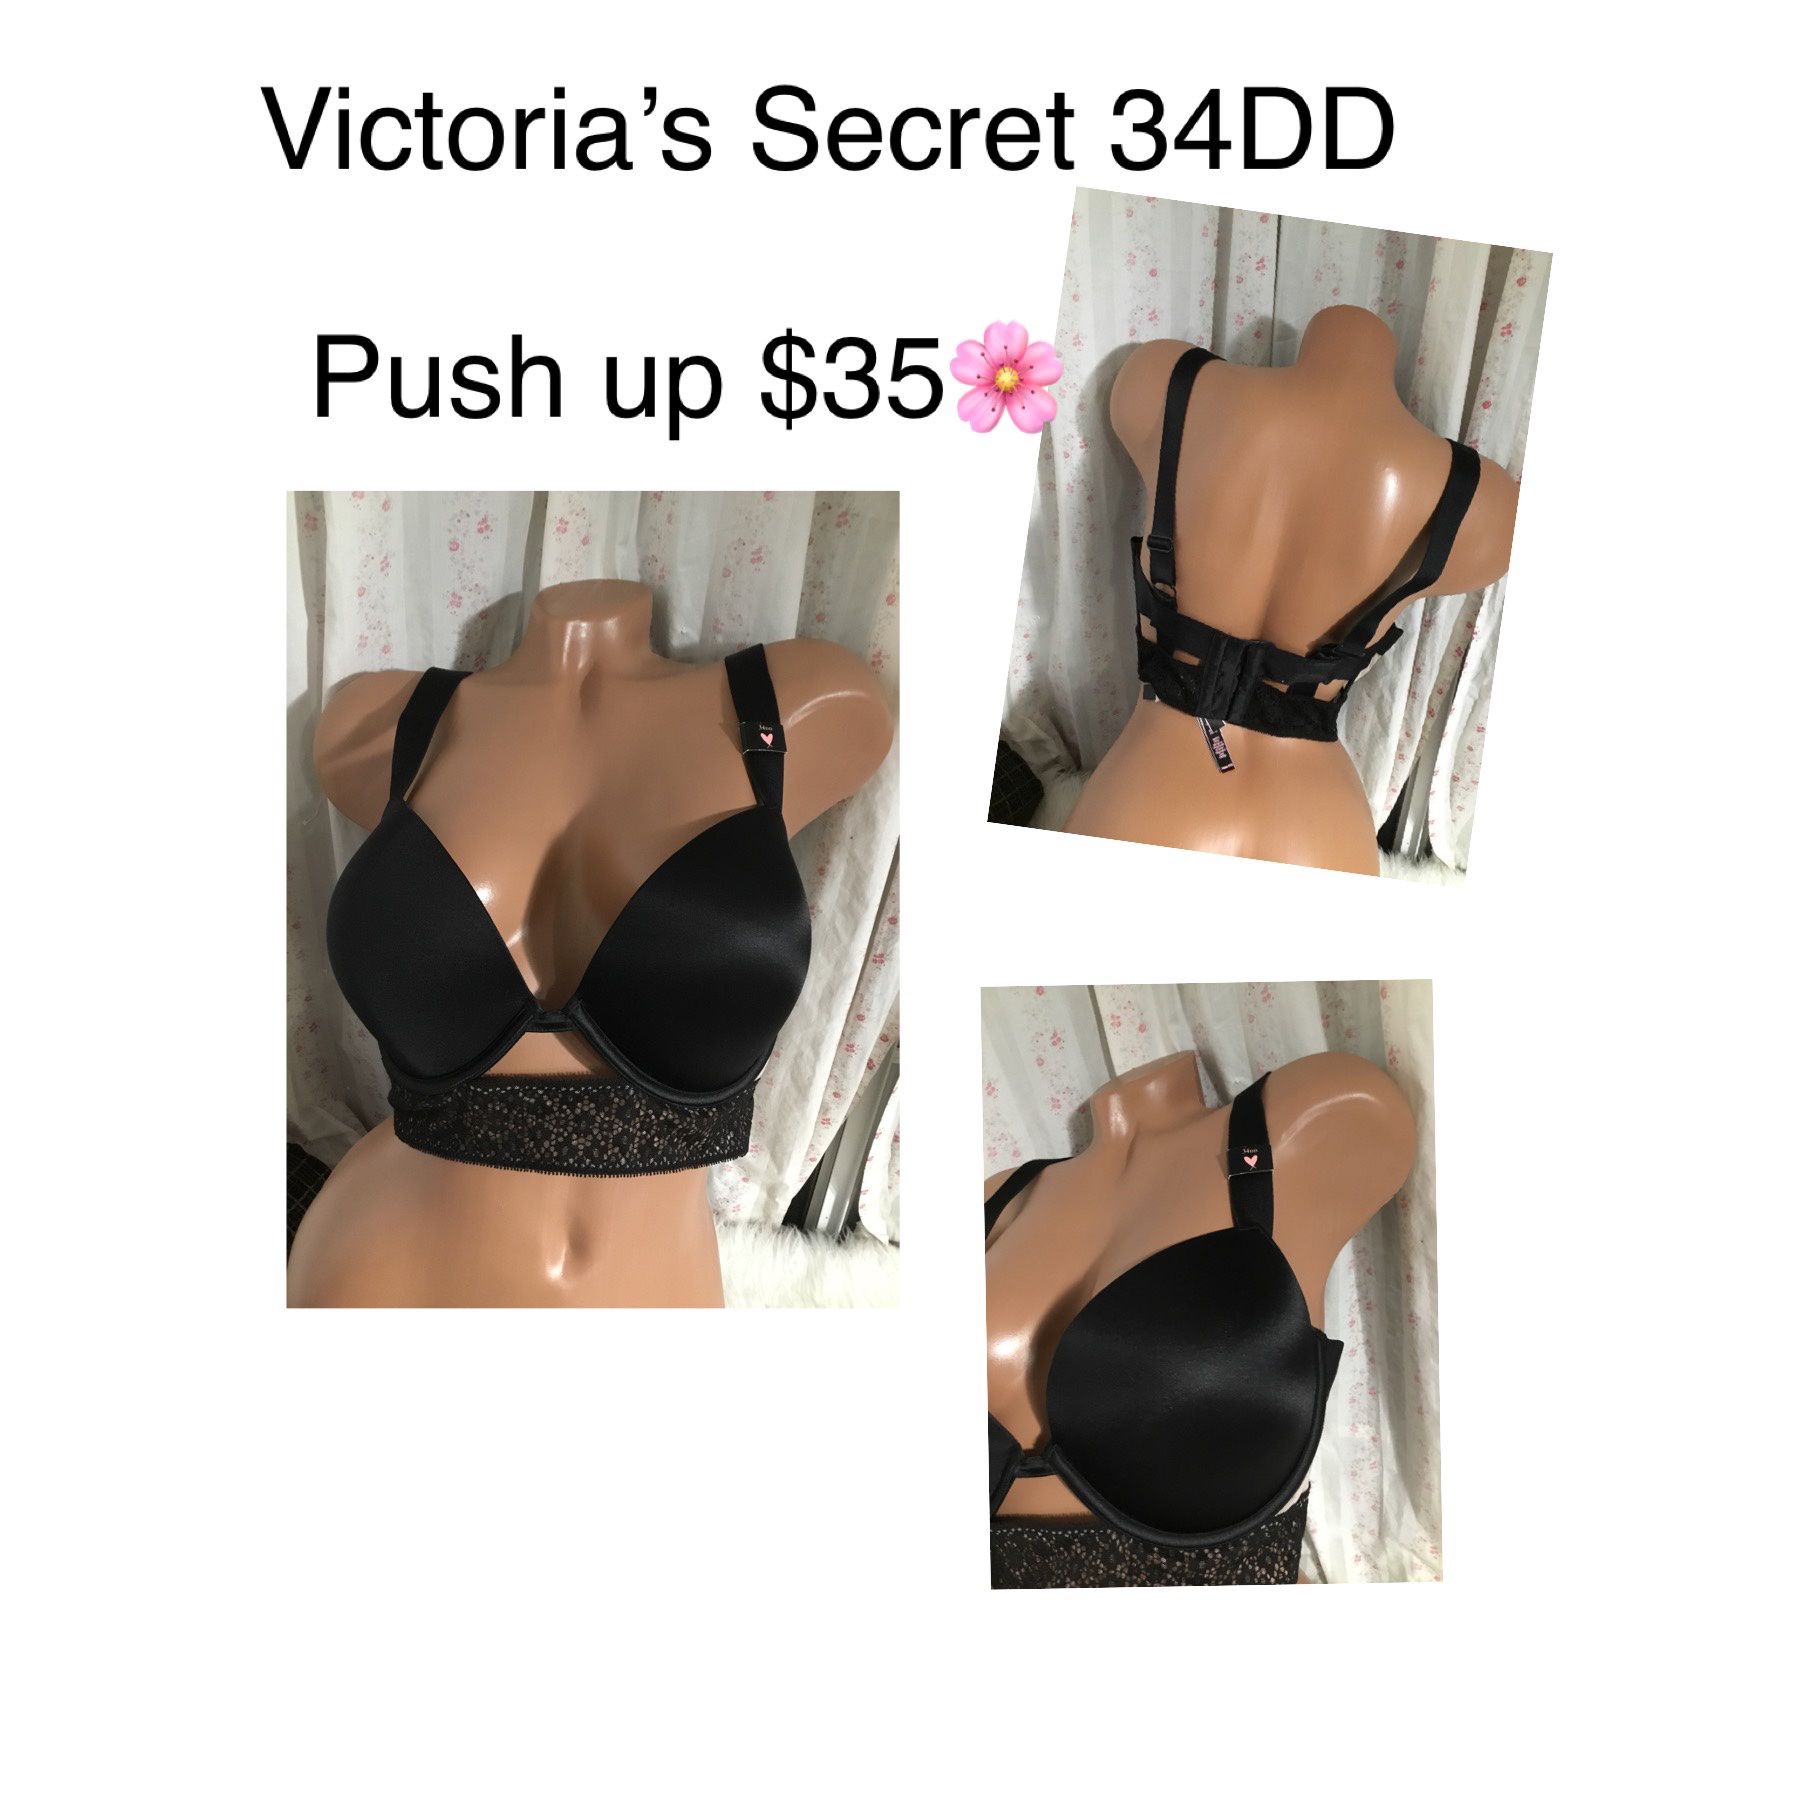 New Bra Victoria Secret Size 34dd Push Up firm Price No Offers for